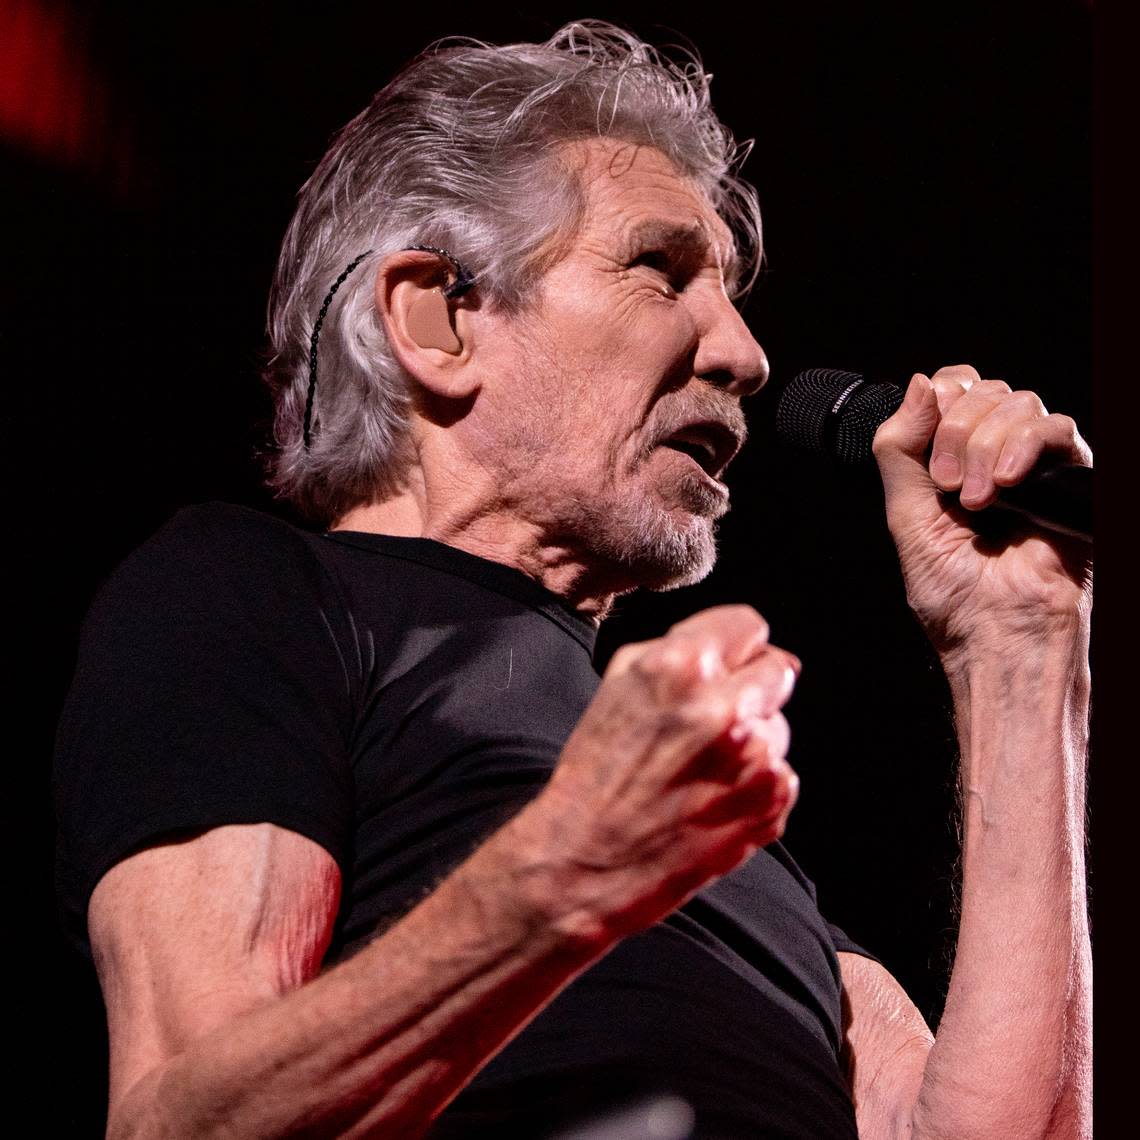 Roger Waters in concert at Raleigh, N.C.’s PNC Arena, Thursday night, Aug. 18, 2022. The show featured 20 Pink Floyd and Waters songs including “Comfortably Numb” and “Wish You Were Here”.